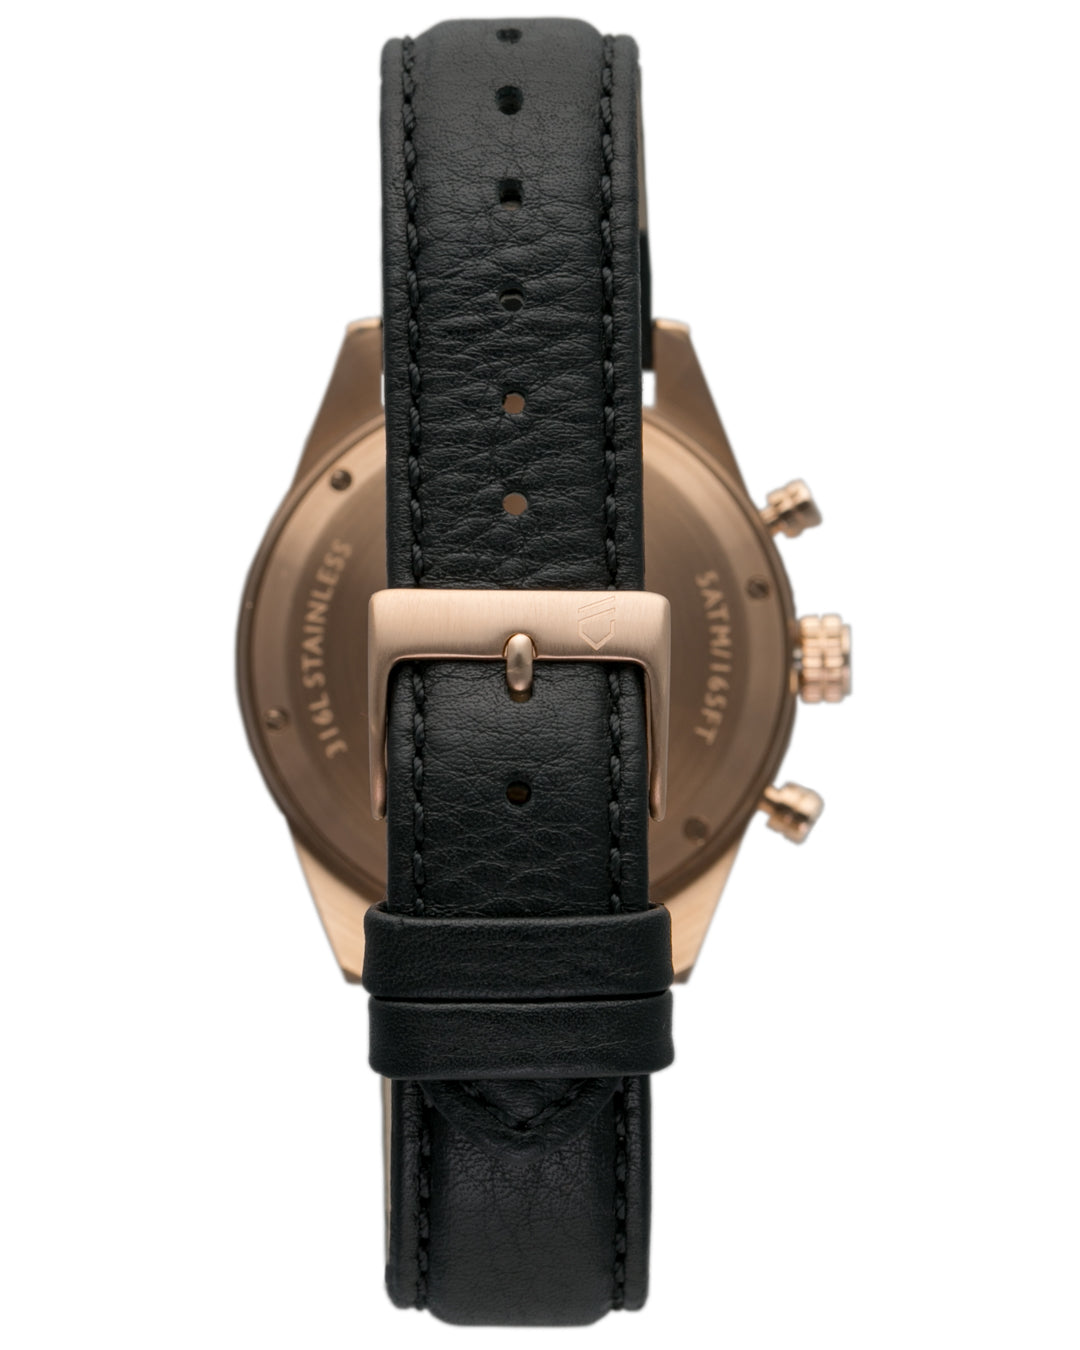 Black Italian leather watch straps with engraved buckles in black rose gold and silver